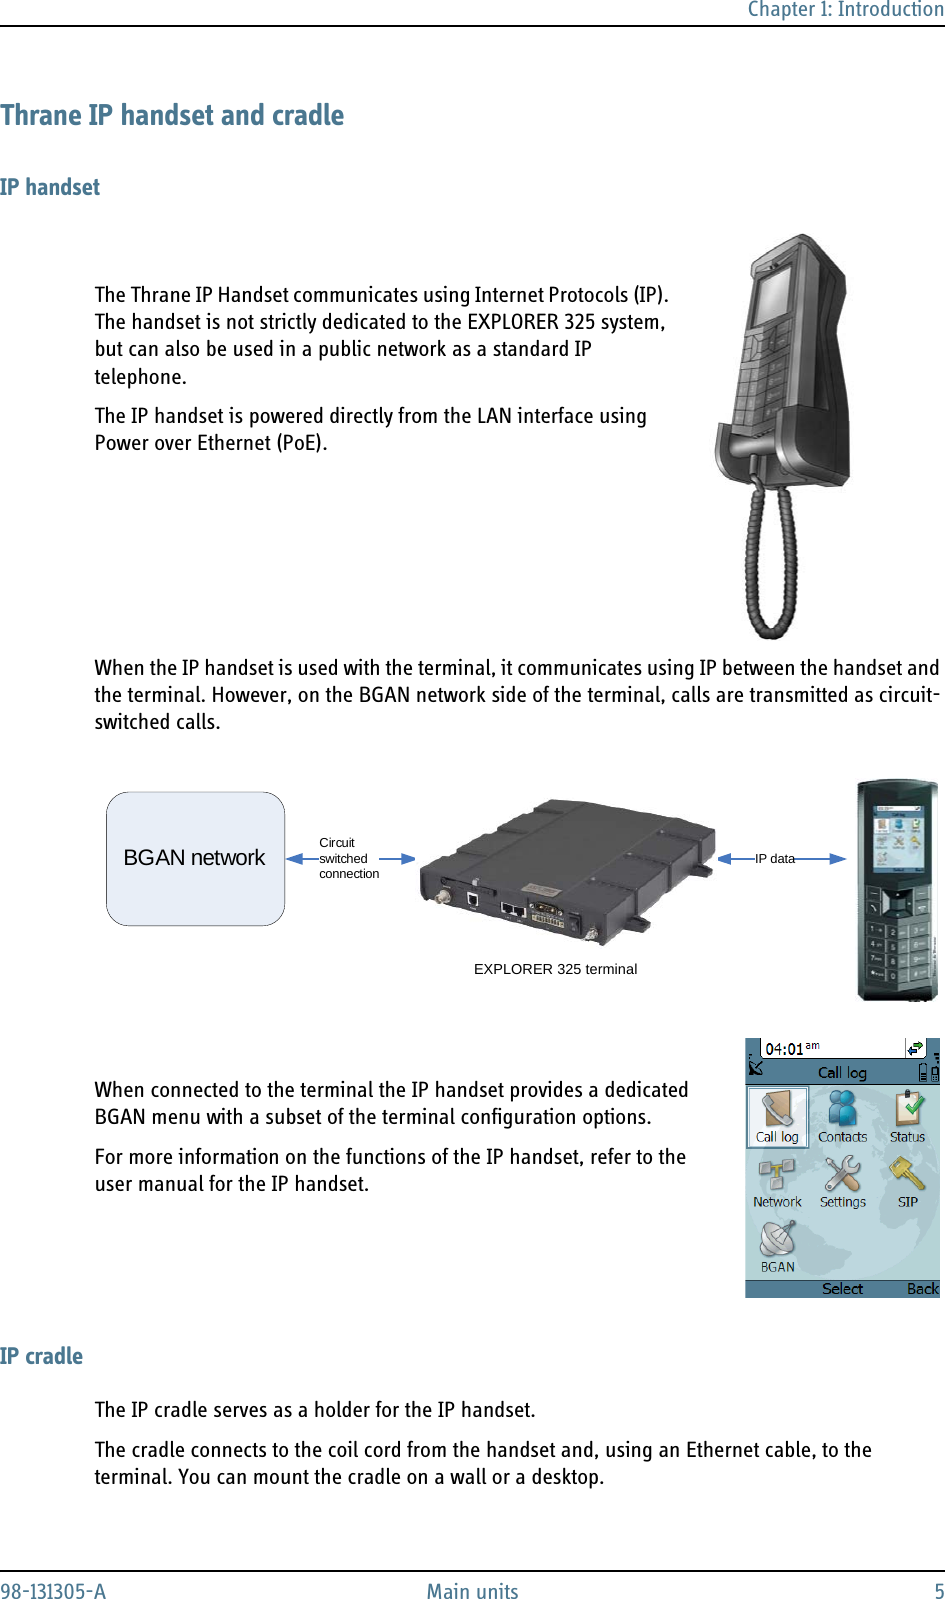 Chapter 1: Introduction98-131305-A Main units 5Thrane IP handset and cradleIP handsetThe Thrane IP Handset communicates using Internet Protocols (IP). The handset is not strictly dedicated to the EXPLORER 325 system, but can also be used in a public network as a standard IP telephone. The IP handset is powered directly from the LAN interface using Power over Ethernet (PoE).When the IP handset is used with the terminal, it communicates using IP between the handset and the terminal. However, on the BGAN network side of the terminal, calls are transmitted as circuit-switched calls.When connected to the terminal the IP handset provides a dedicated BGAN menu with a subset of the terminal configuration options. For more information on the functions of the IP handset, refer to the user manual for the IP handset.IP cradleThe IP cradle serves as a holder for the IP handset. The cradle connects to the coil cord from the handset and, using an Ethernet cable, to the terminal. You can mount the cradle on a wall or a desktop.IP dataCircuit switchedconnectionBGAN networkEXPLORER 325 terminal